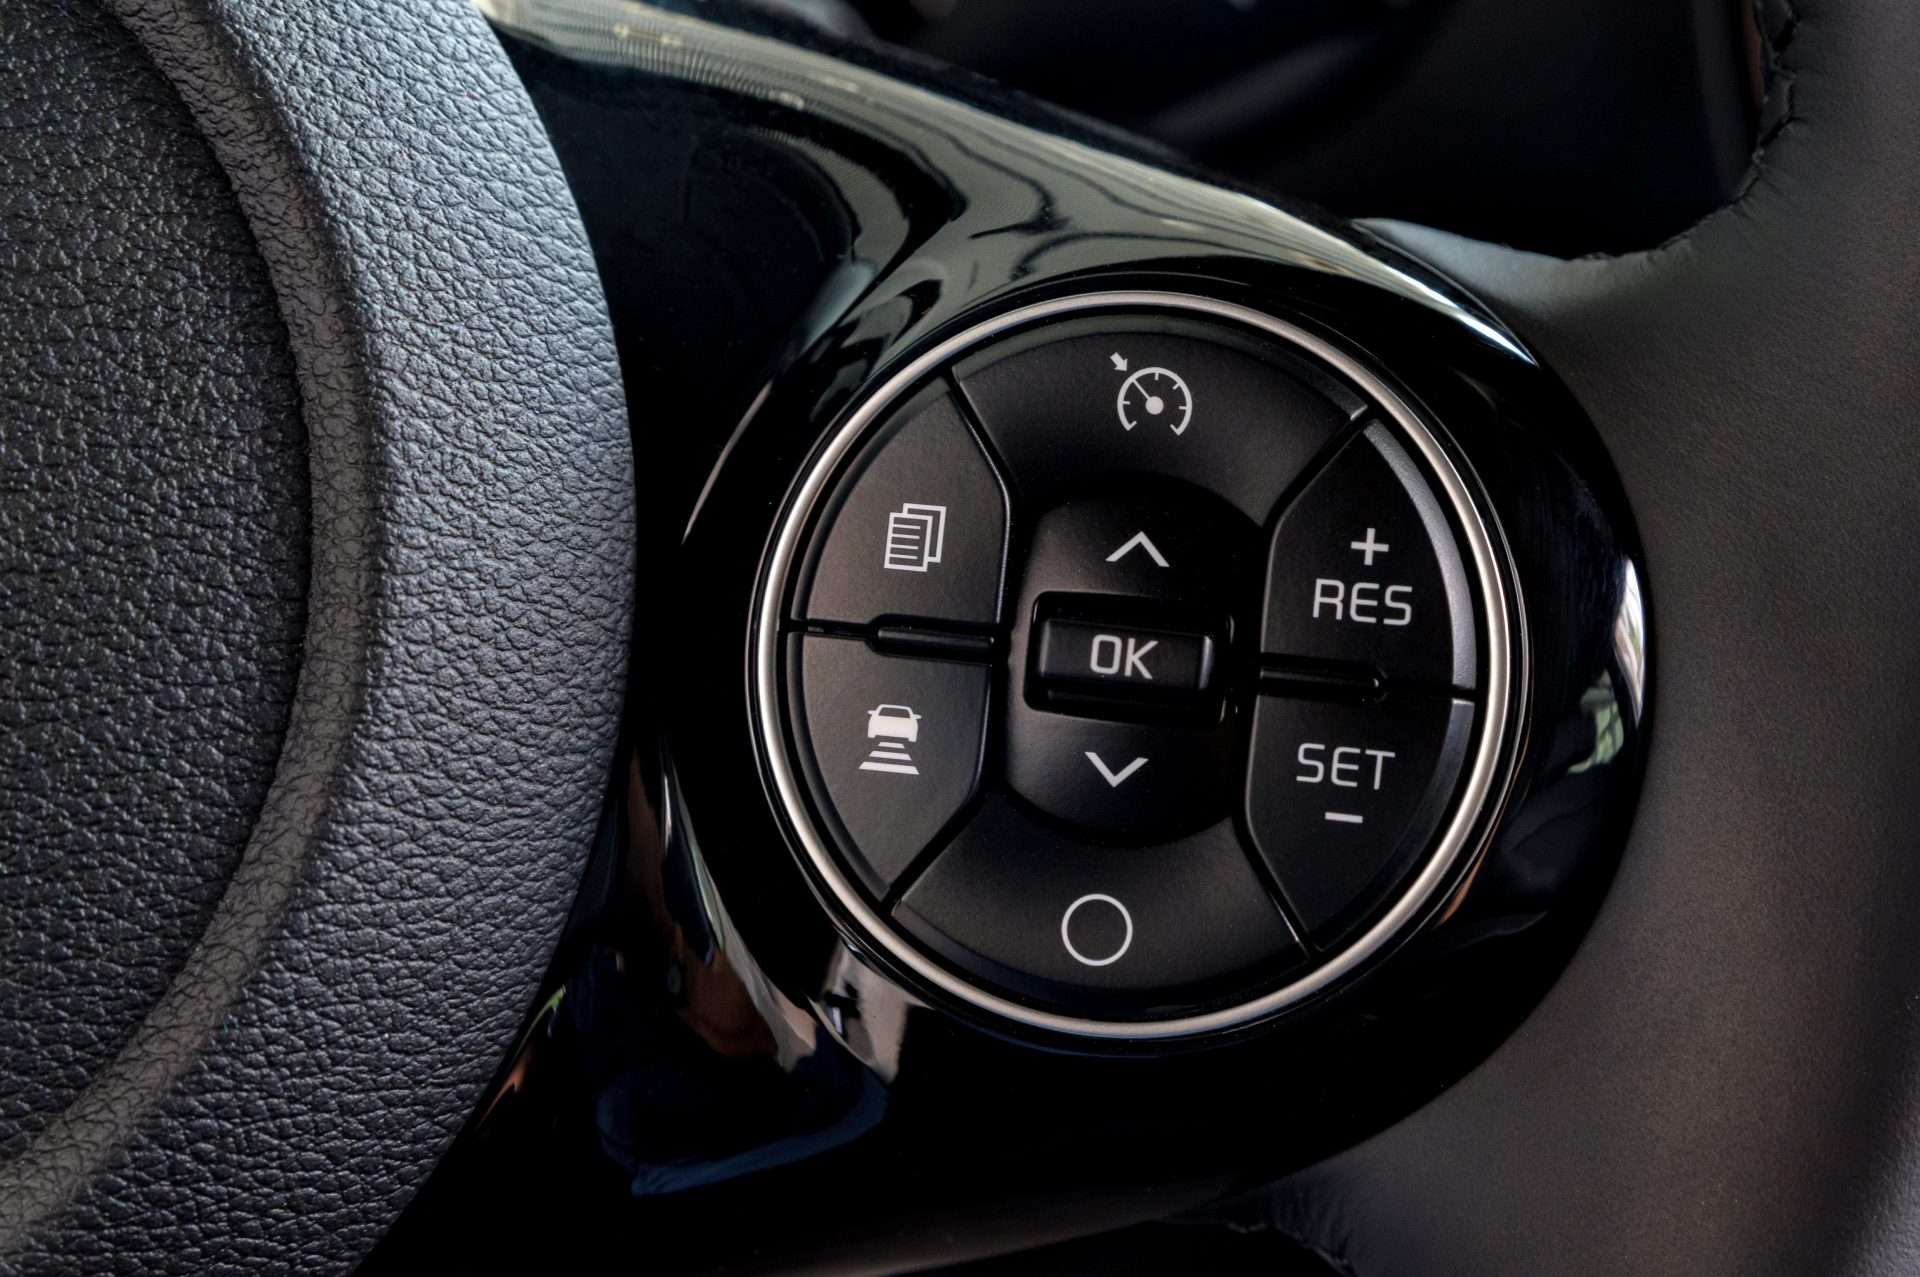 Cruise control panel in a car